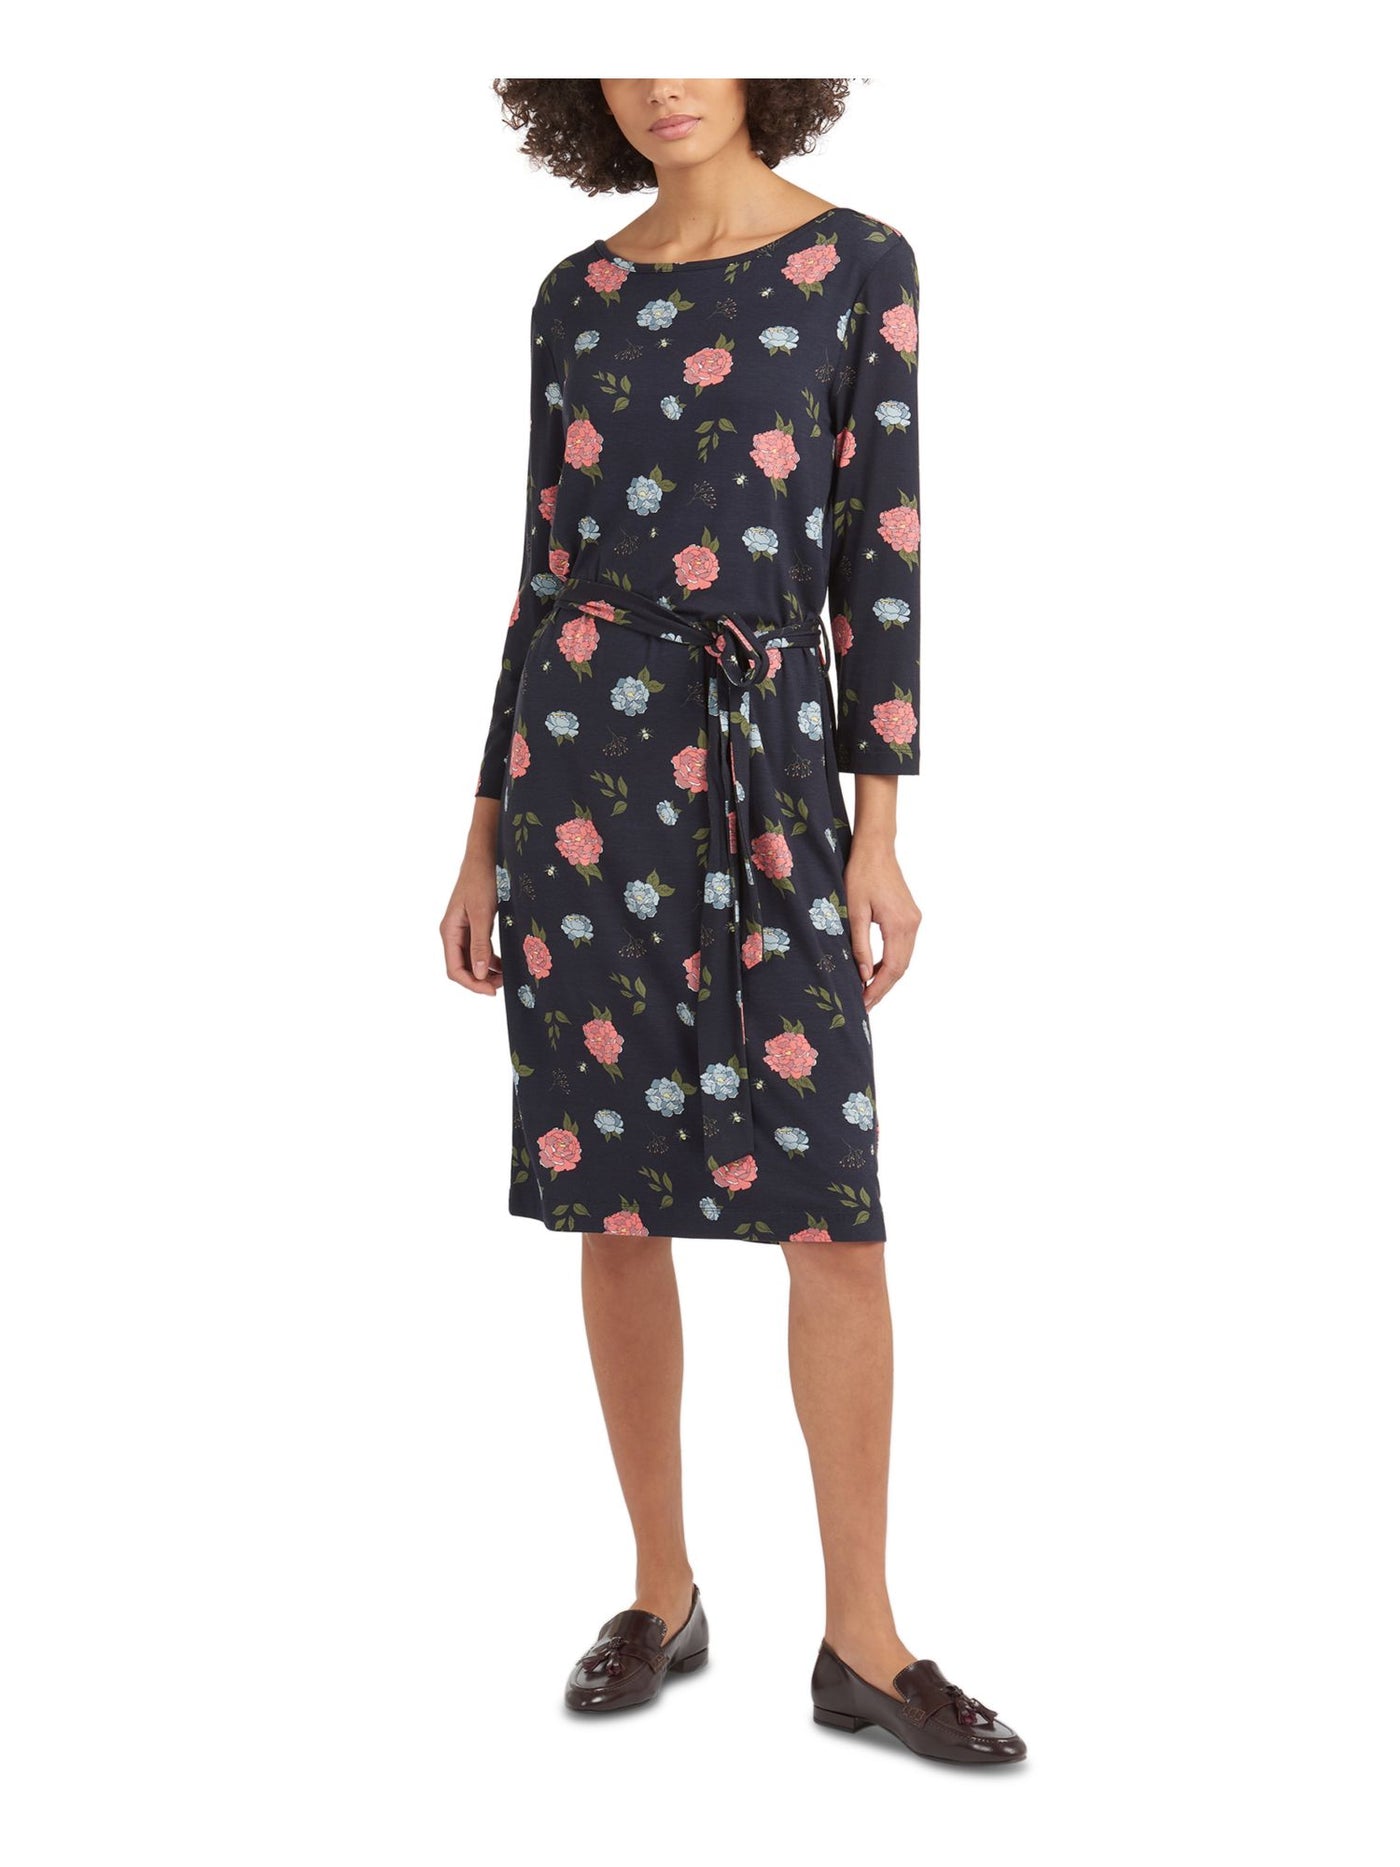 BARBOUR Womens Navy Stretch Floral 3/4 Sleeve Jewel Neck Above The Knee Wear To Work Sheath Dress 4